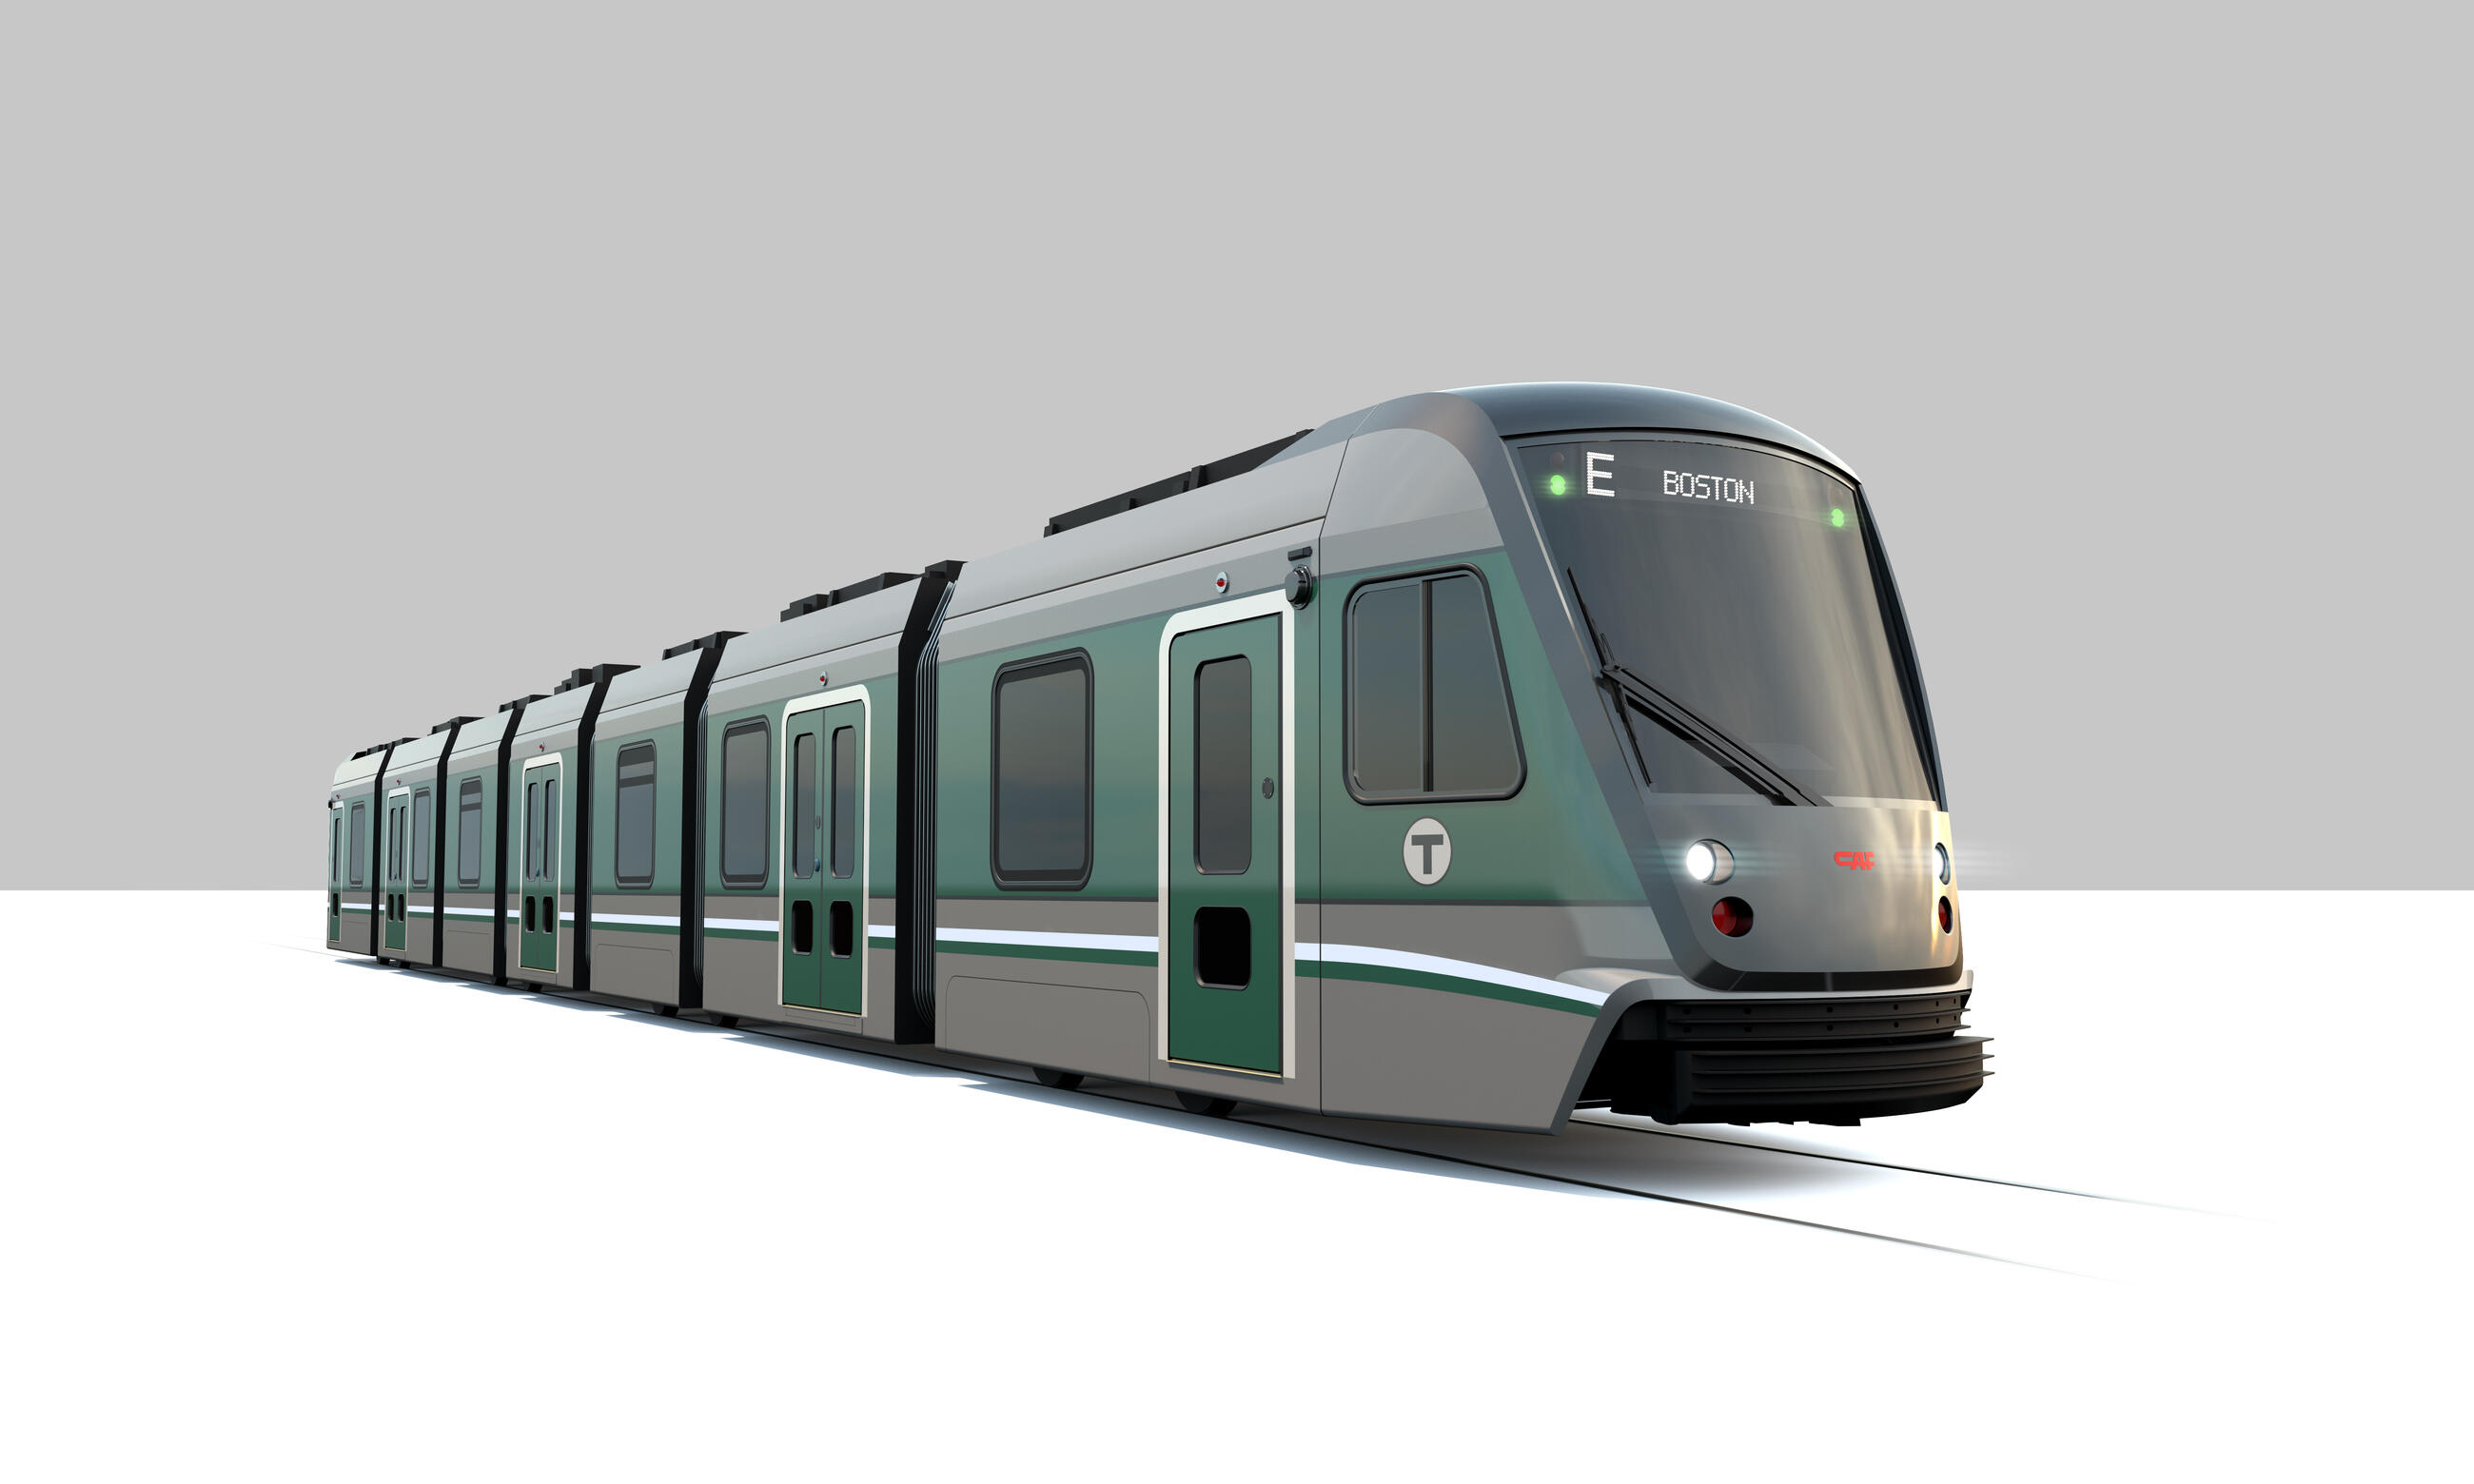 The winning design is “Option 3,” featuring a green and dark gray paint scheme along the body of the vehicle, green doors, and a white and navy blue lower running strip.